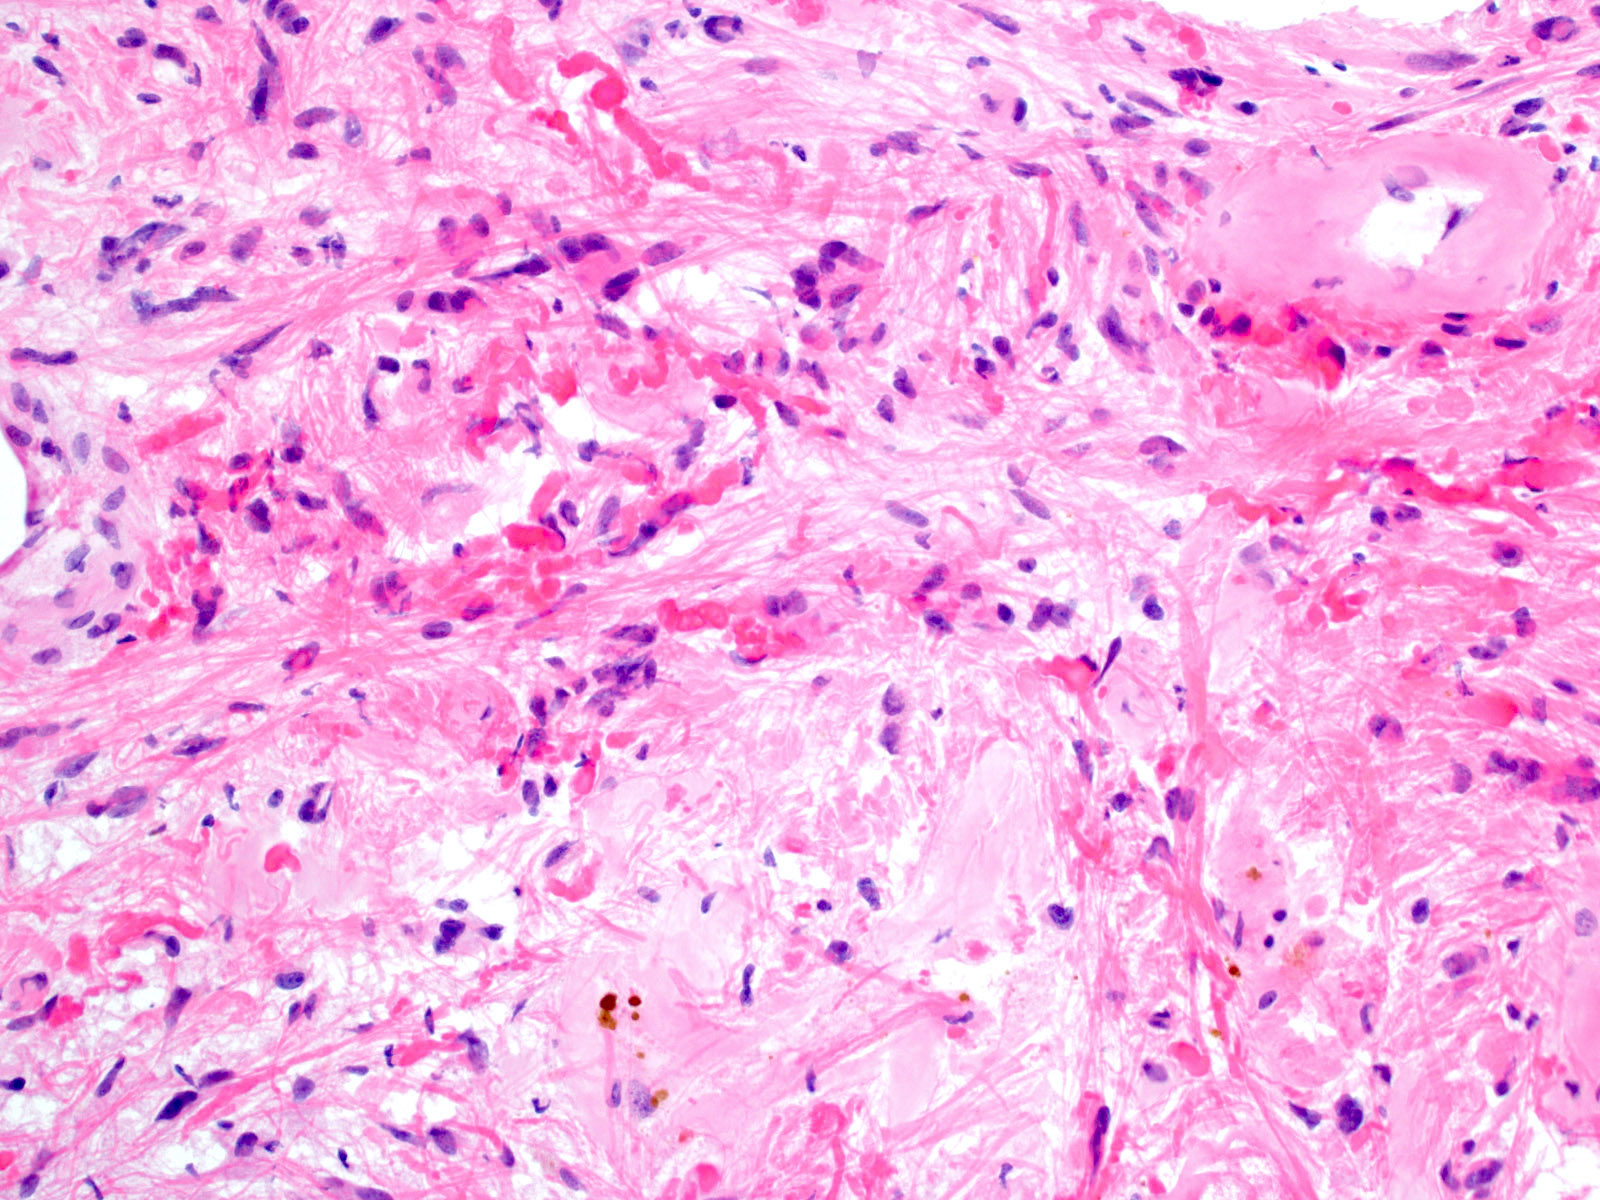 Atypical piloid glial cells